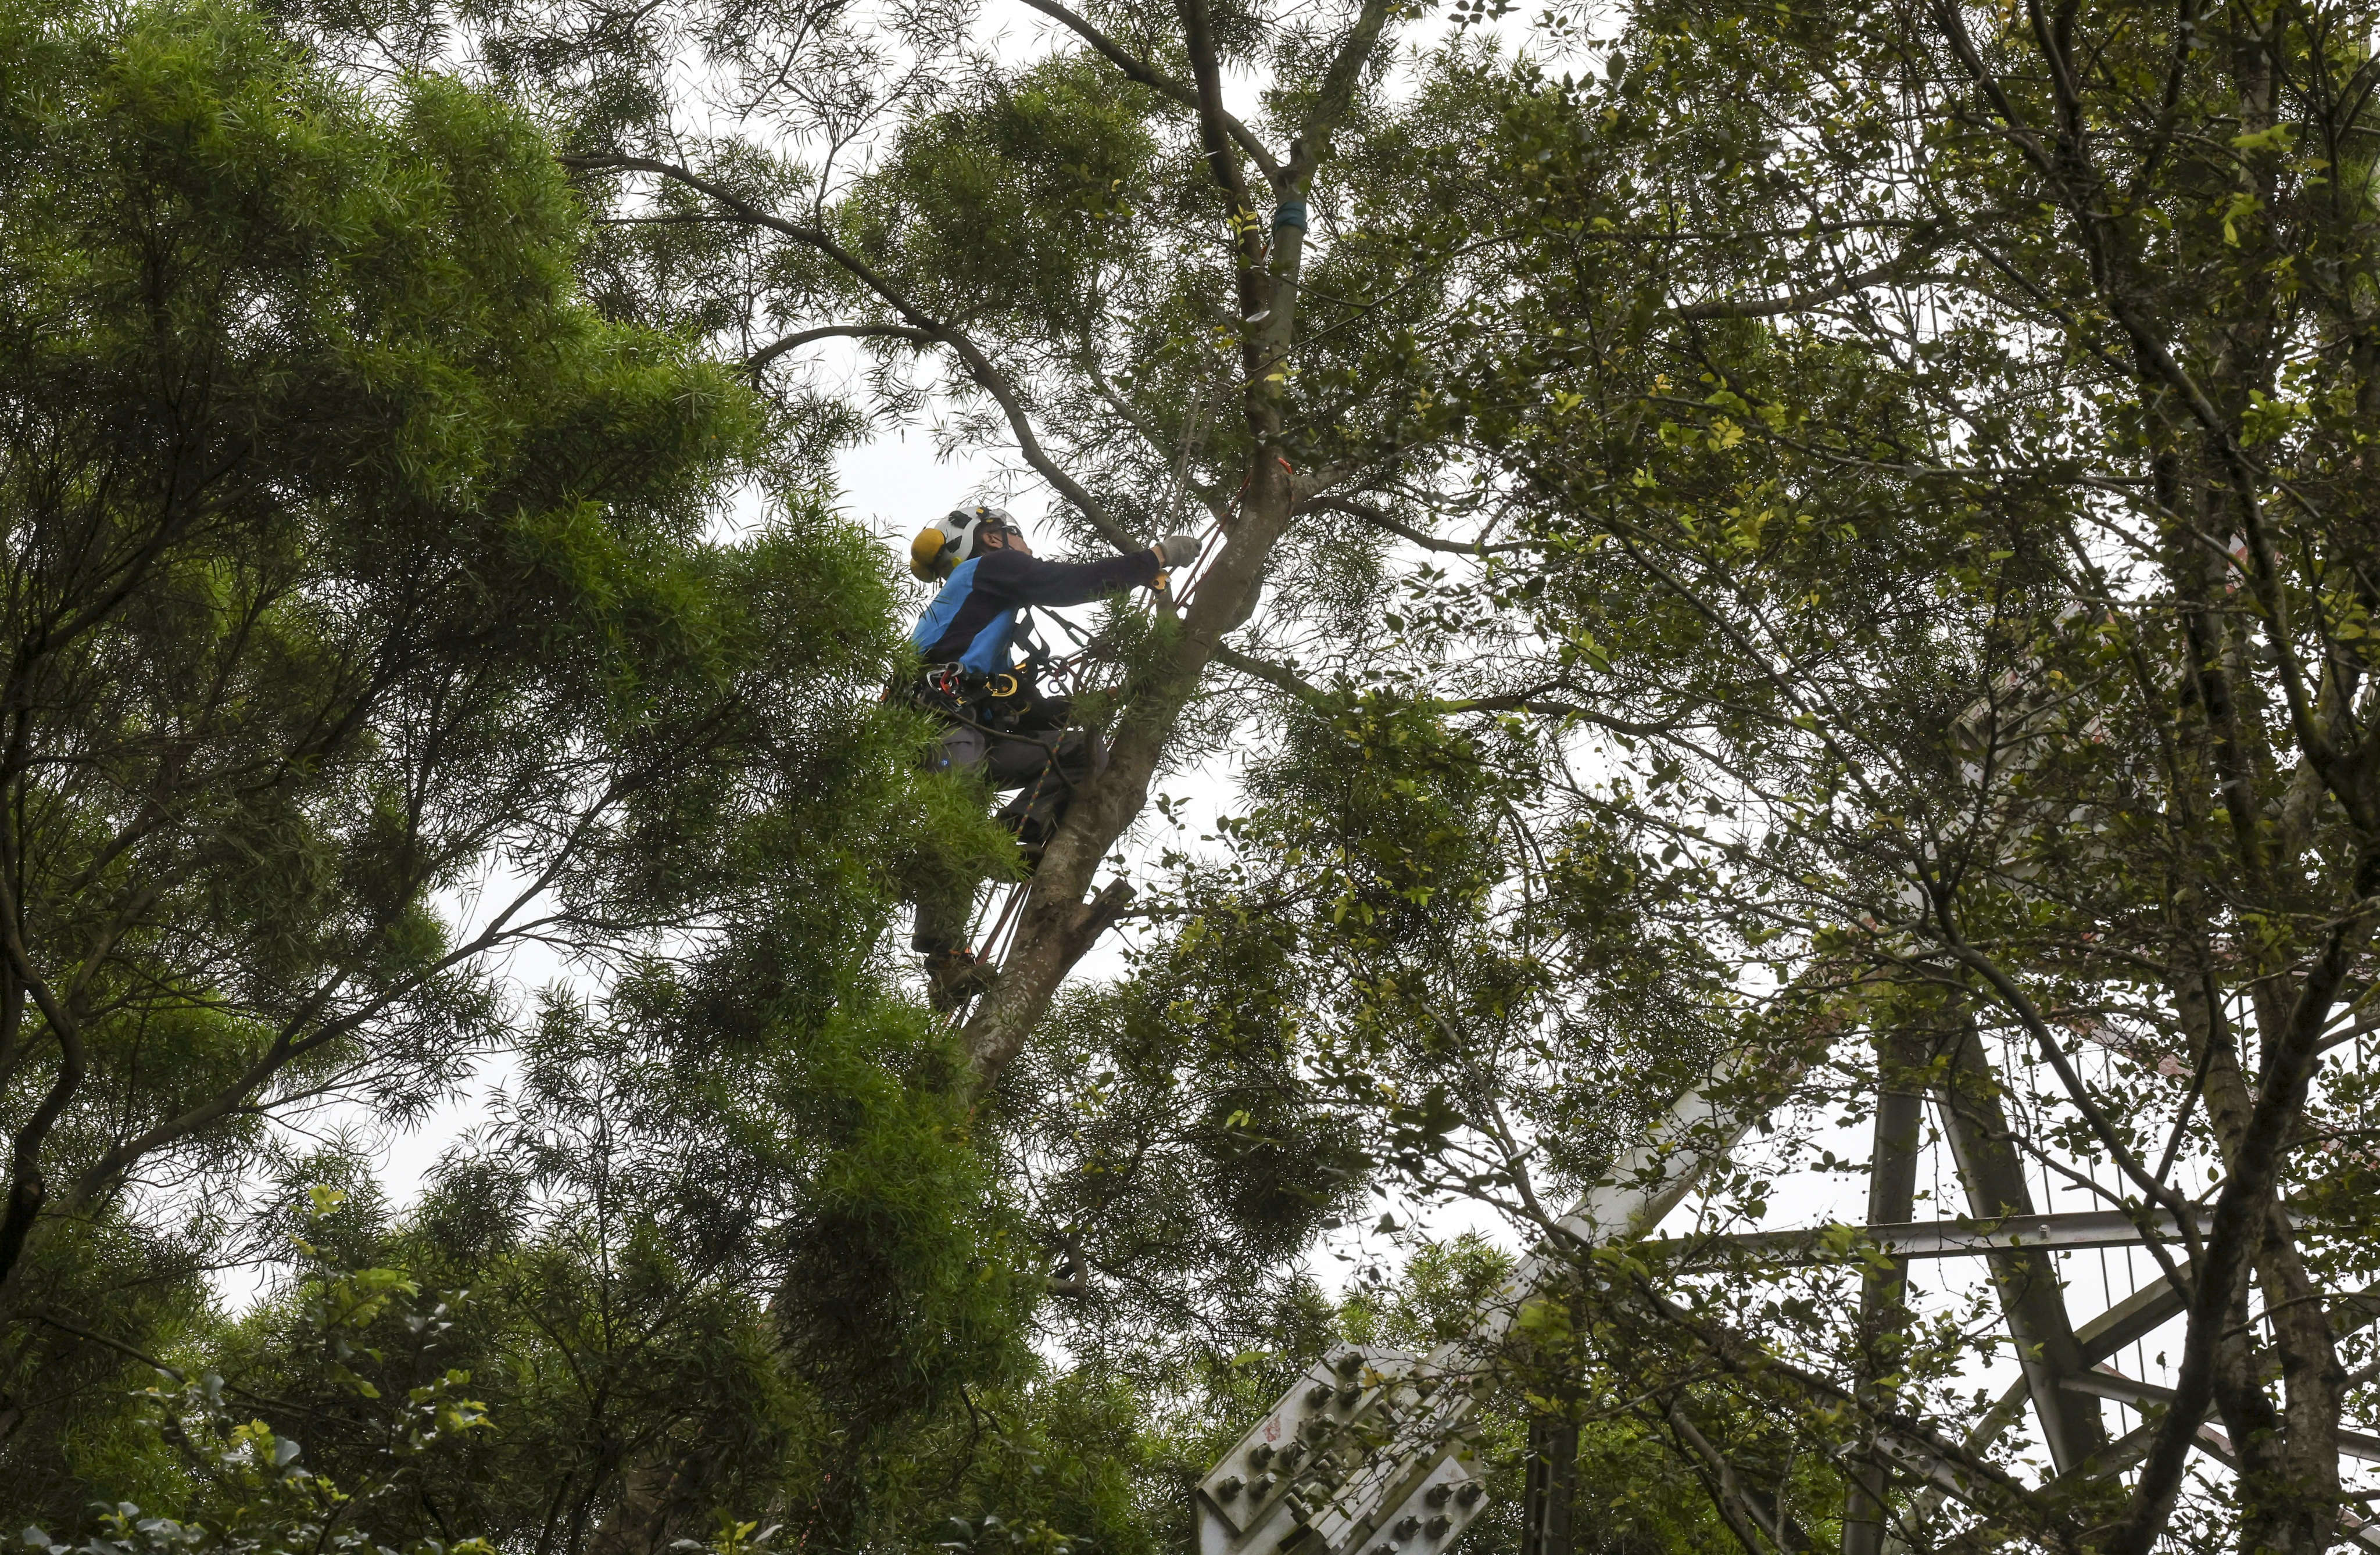 A CLP Power worker pruning tree branches in Kwai Chung. 
Photo: Jonathan Wong